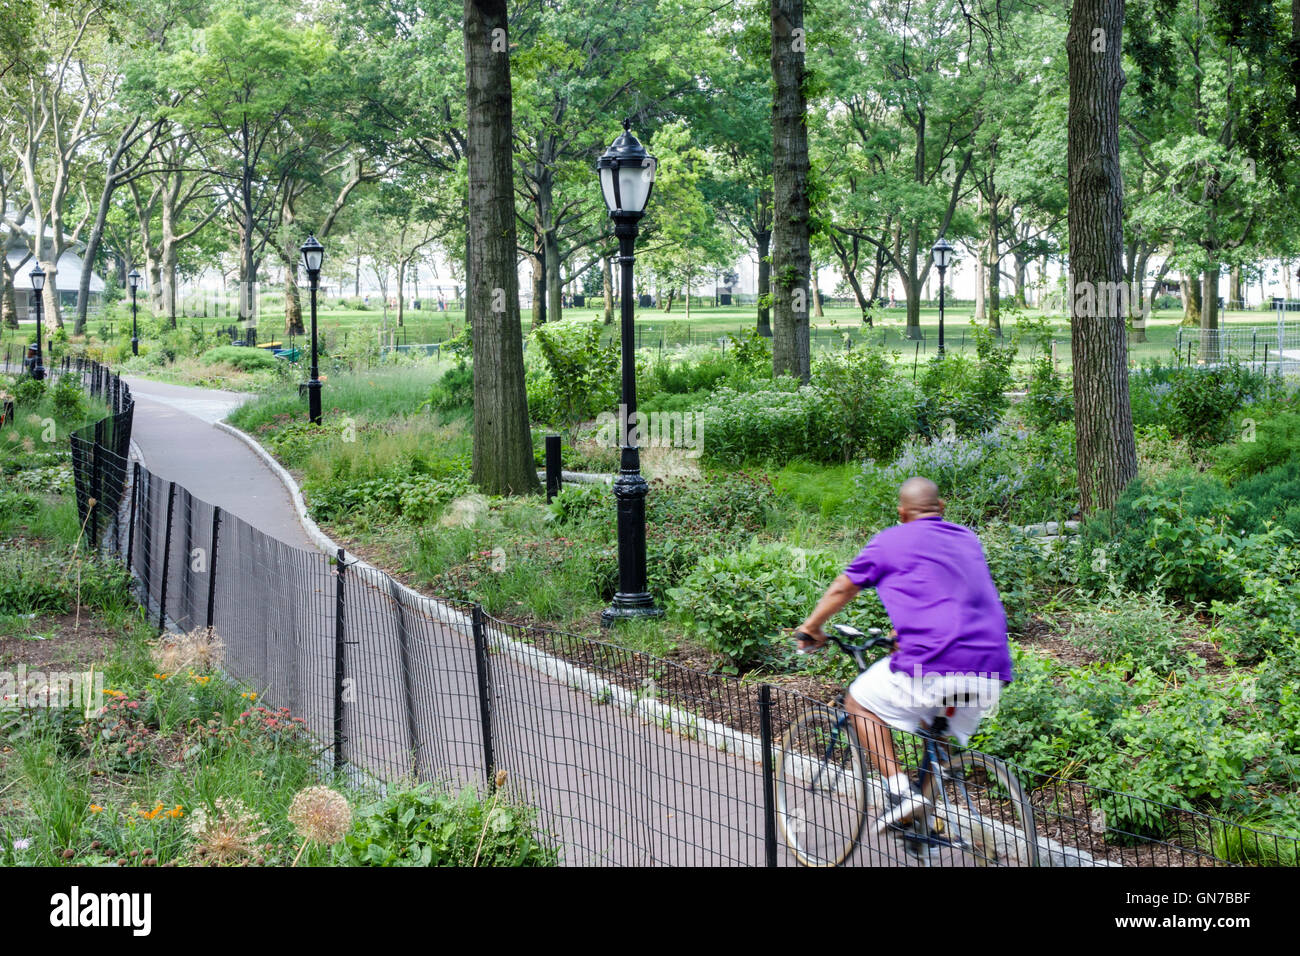 New York City,NY NYC Lower Manhattan,Downtown,Battery Park,public park,garden,bicycle path,Black adult,adults,man men male,riding,NY160715006 Stock Photo